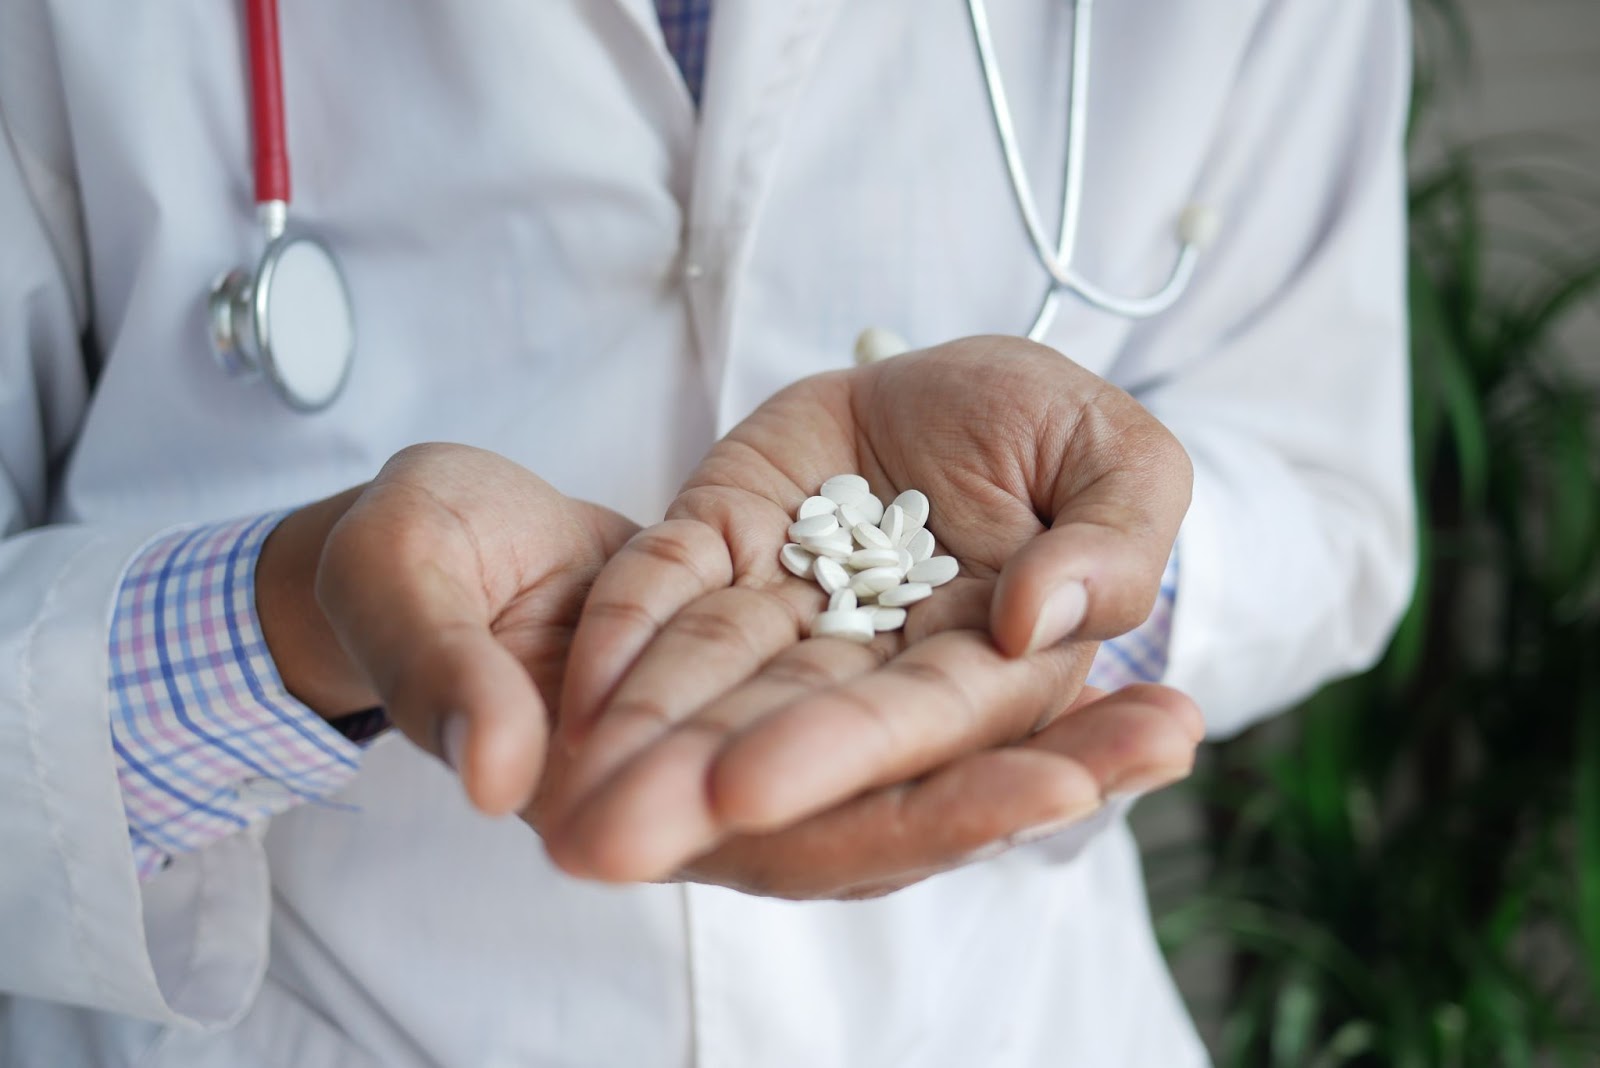 Male doctor in lab coat holds white pills in hands, indicating supplementation option to combat vitamin d deficiency and infertility that can be associated with it.